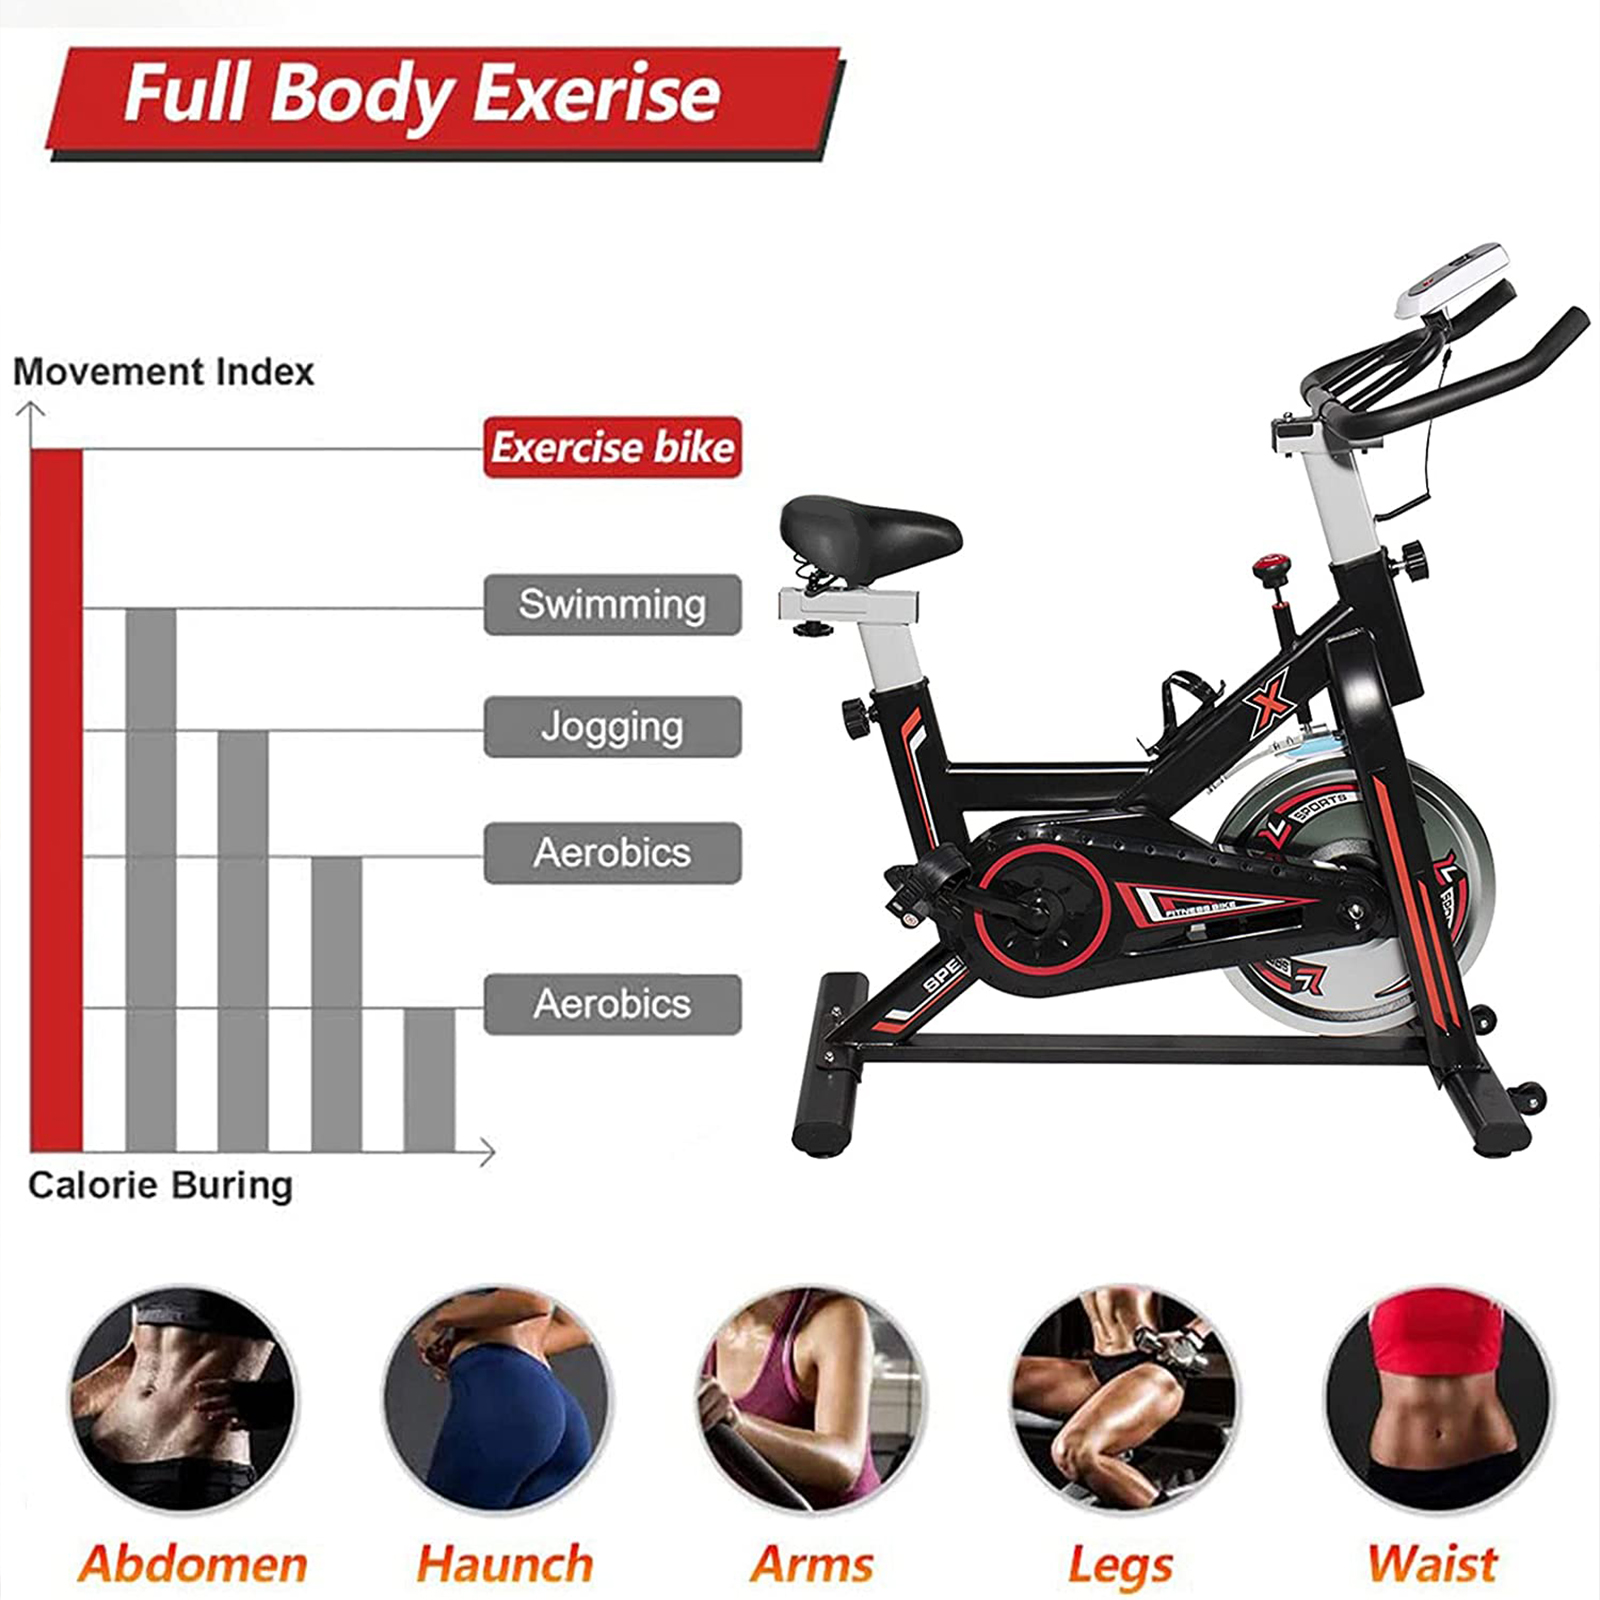 SKONYON Exercise Bike Stationary Indoor Cycling Bike Heavy Duty Flywheel Bicycle for Home Cardio Workout - image 5 of 9